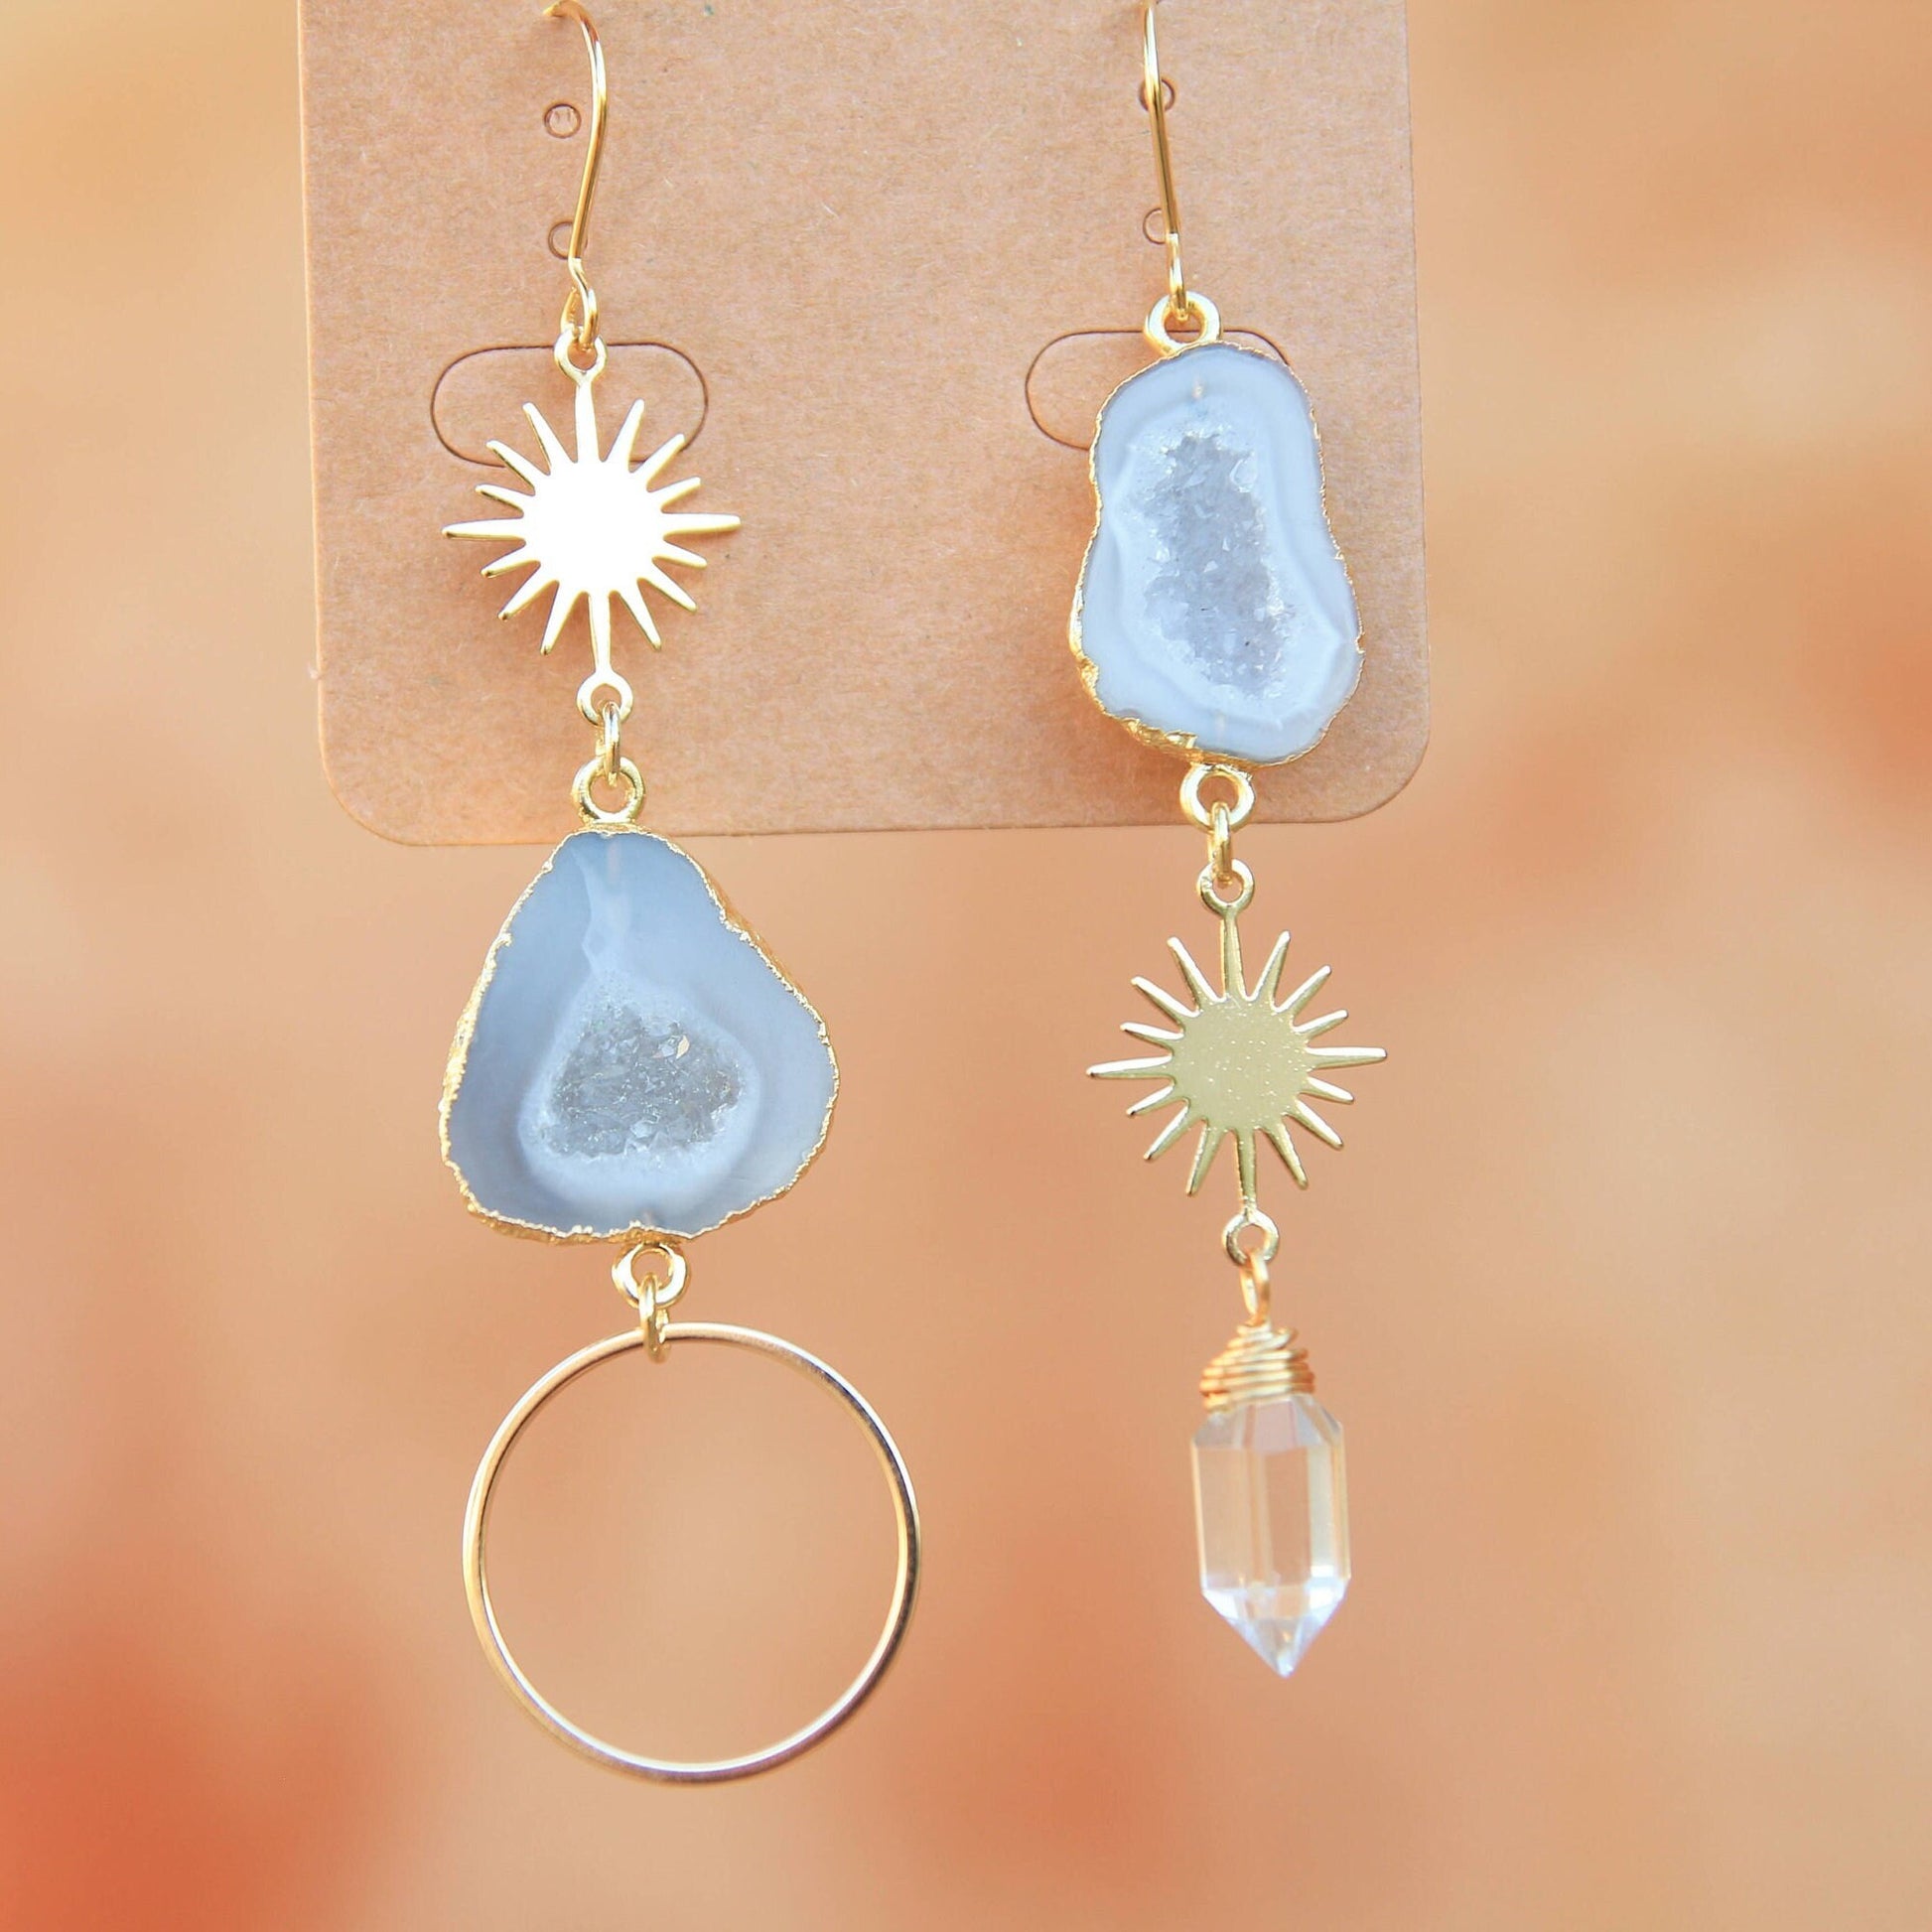 Natural Geode Gold Sun Earrings with Clear Quartz Crystal Point